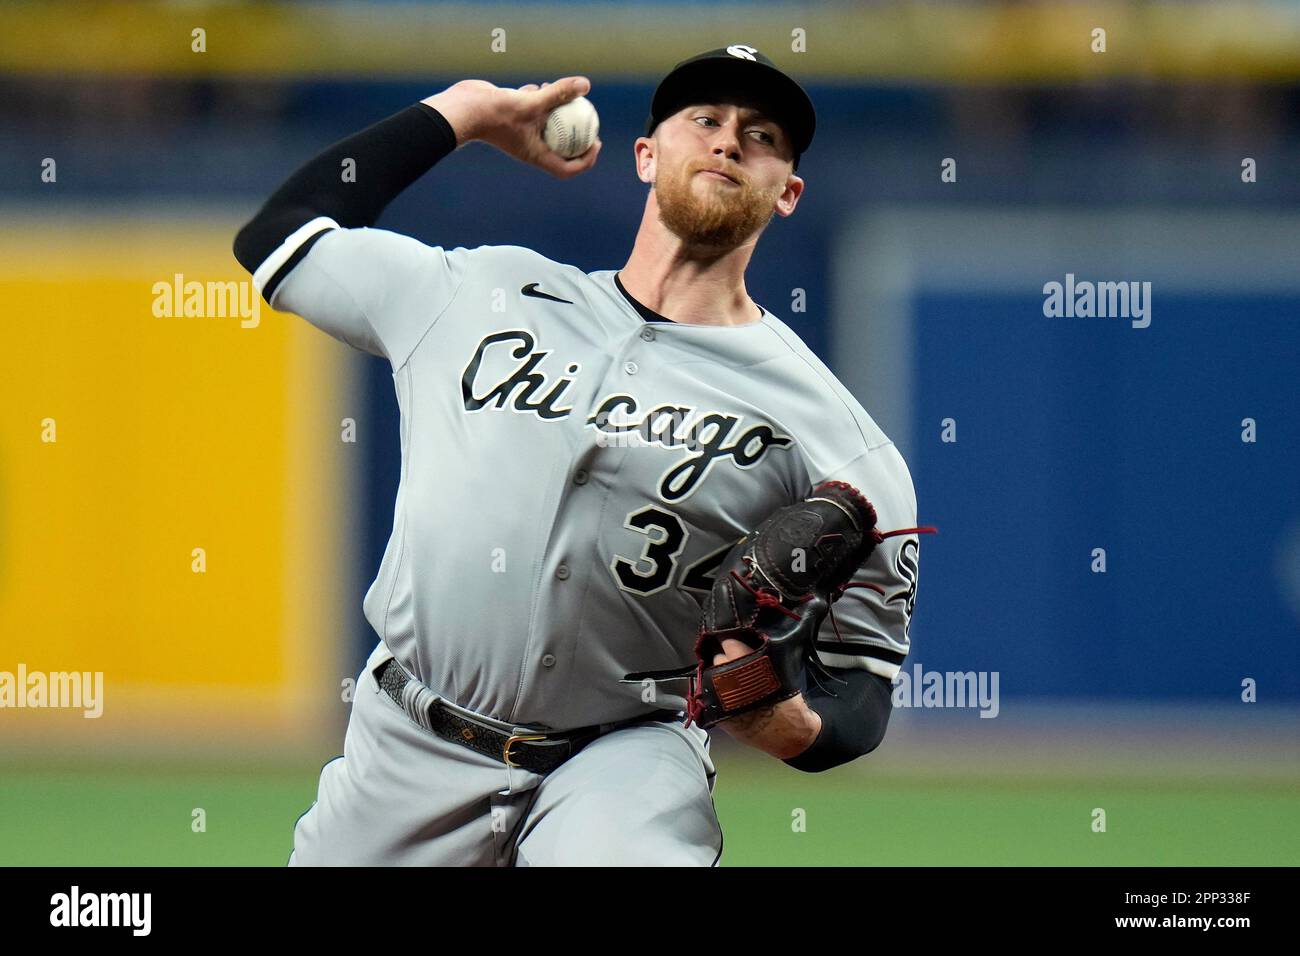 Chicago White Sox's Michael Kopech pitches to the Tampa Bay Rays